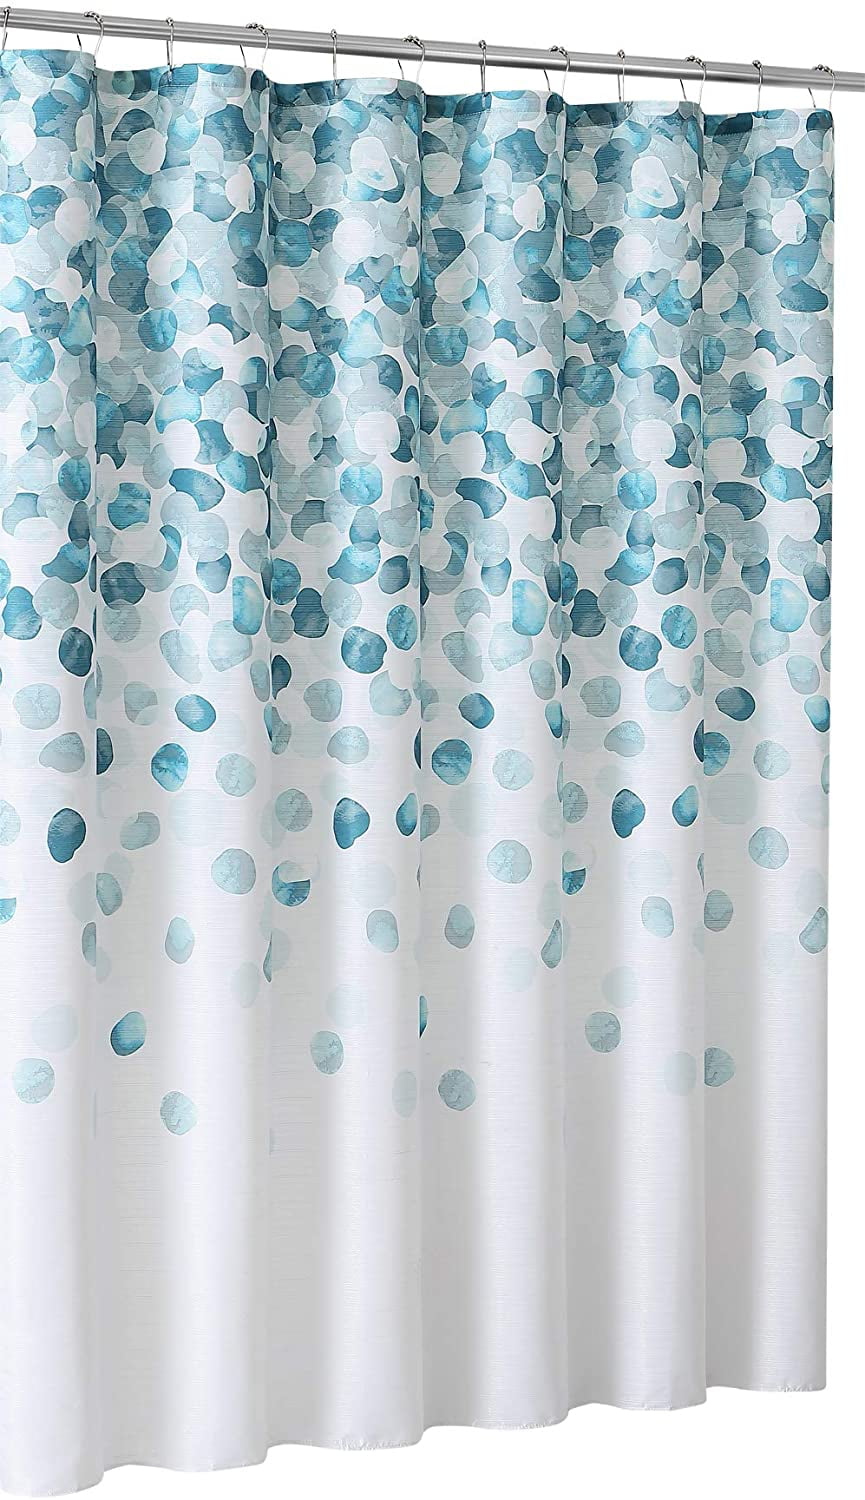 Details about   Blue Gold Cube Geometry Abstract Pretty Modern Fabric Shower Curtain 